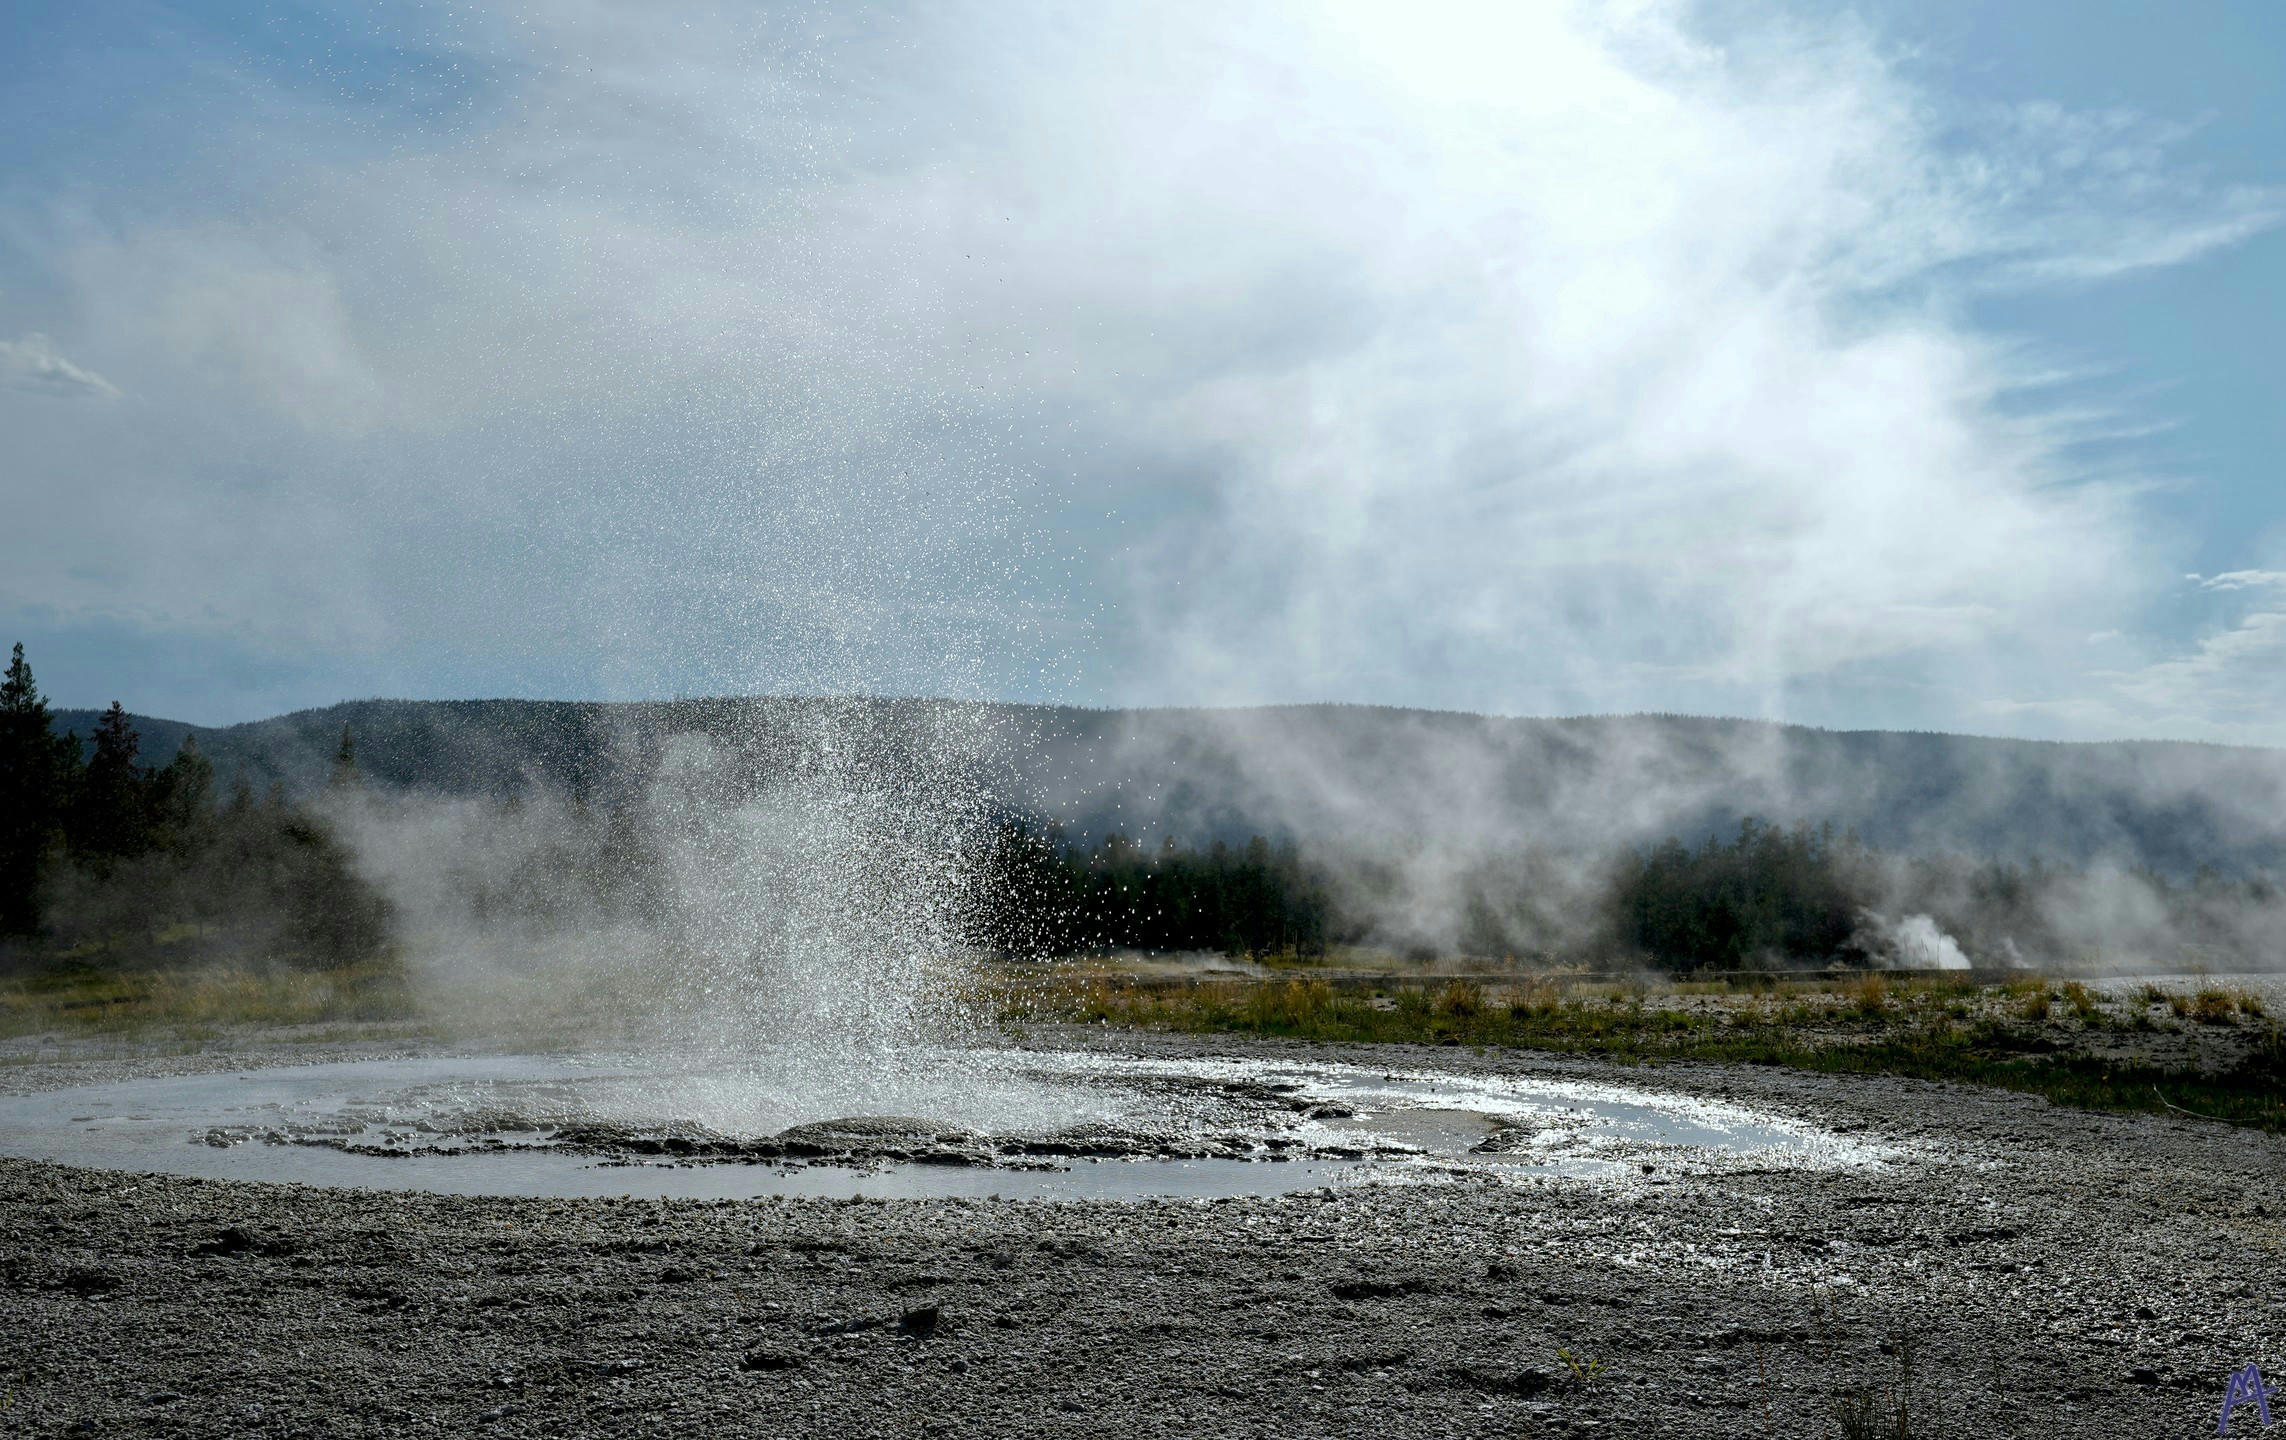 Geyser sprouting with mist in distance at Yellowstone